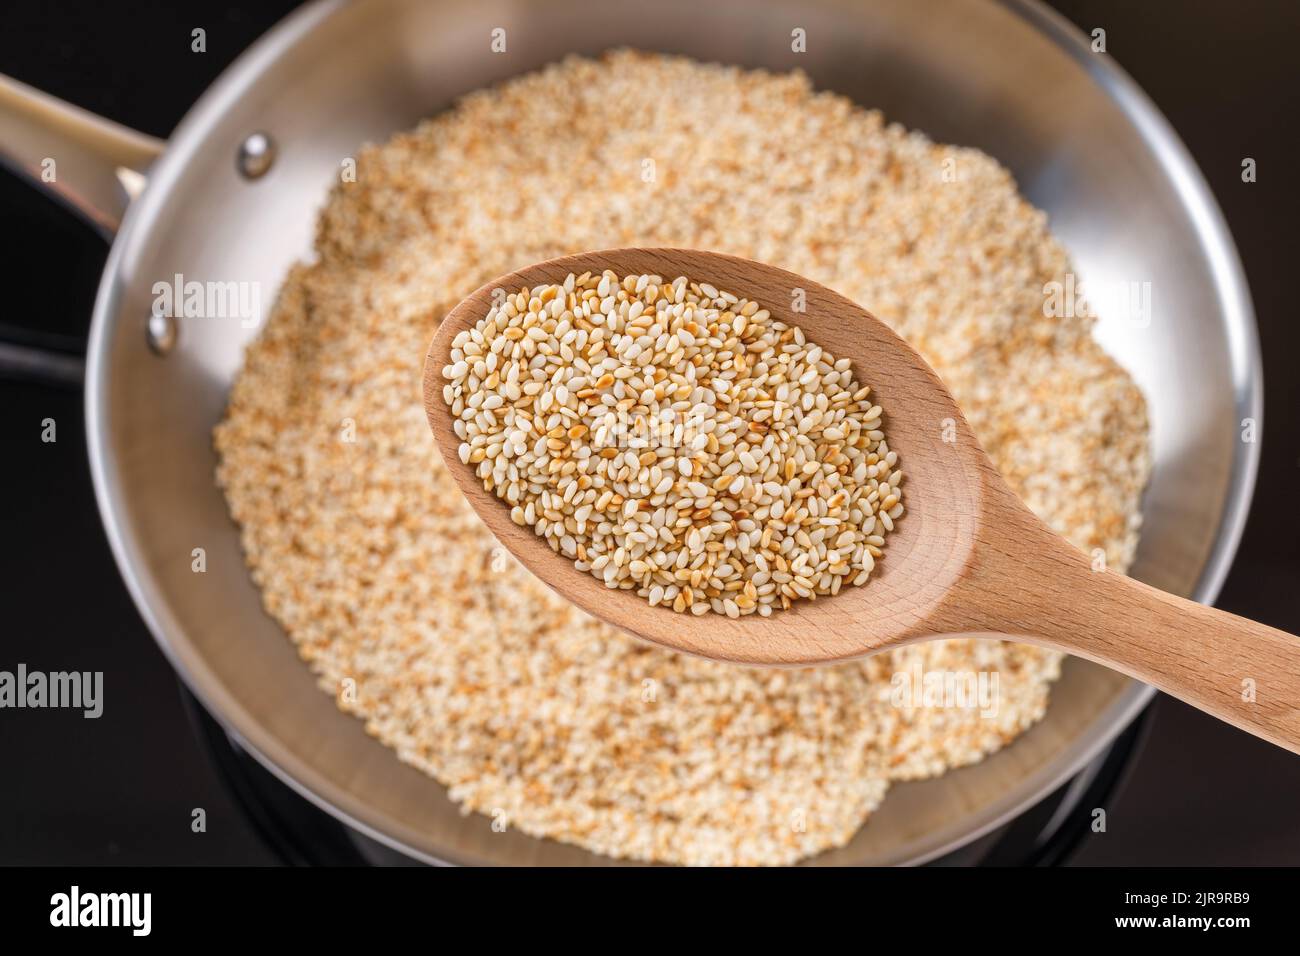 Toasted sesame seeds in a wooden spoon over stainless steel skillet. Roasting organic benne grains in a frying pan. Sesamum indicum as calcium source. Stock Photo